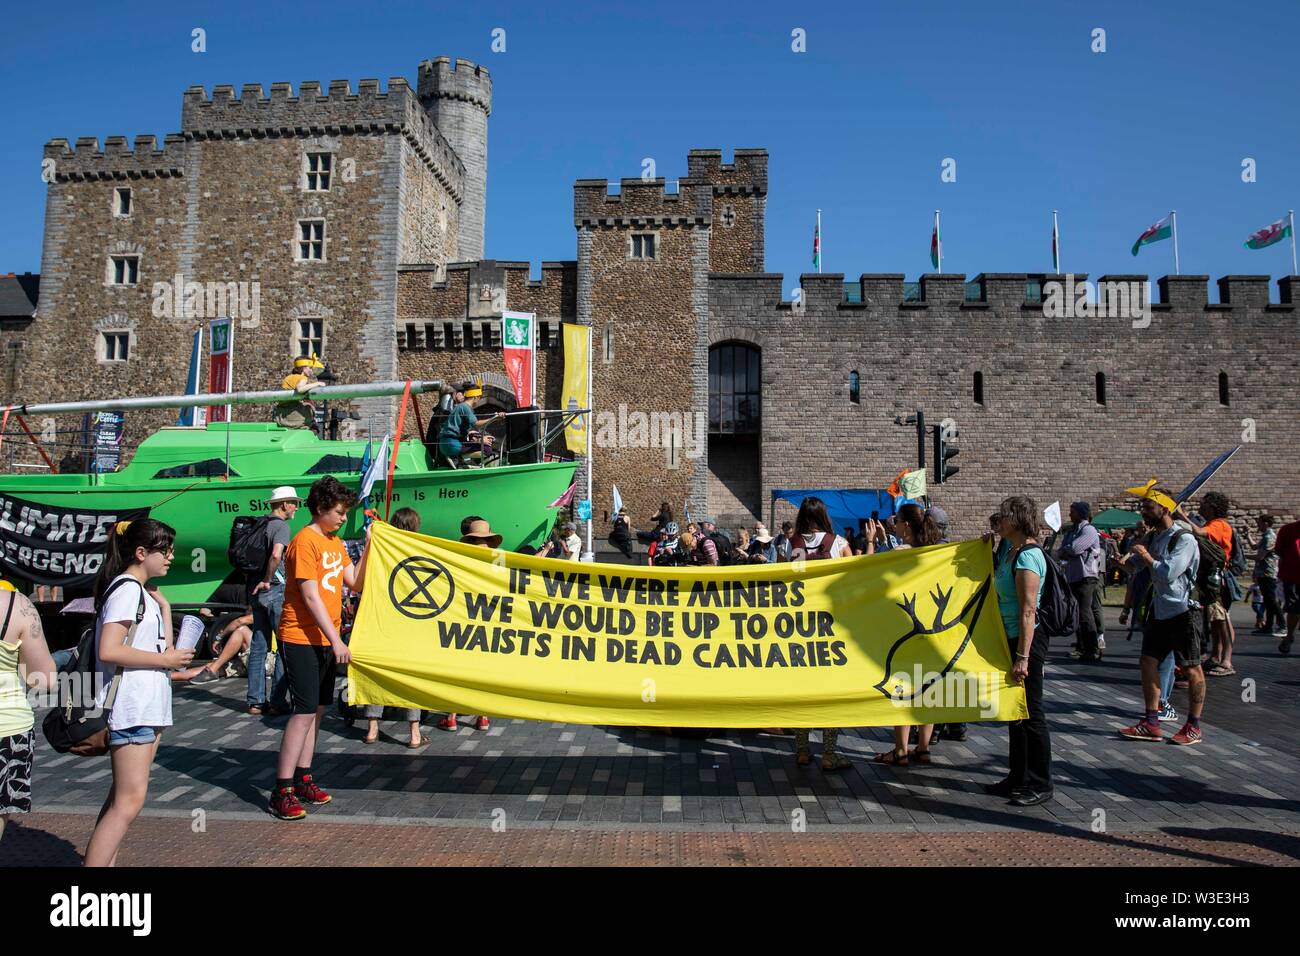 Cardiff, Wales, UK, July 15th 2019. Activists outside Cardiff Castle as Extinction Rebellion activism closes roads around the city centre. Extinction Rebellion describes itself as an international rebellion against the criminal inaction on the climate and ecological crisis. Credit: Mark Hawkins/Alamy Live News Stock Photo